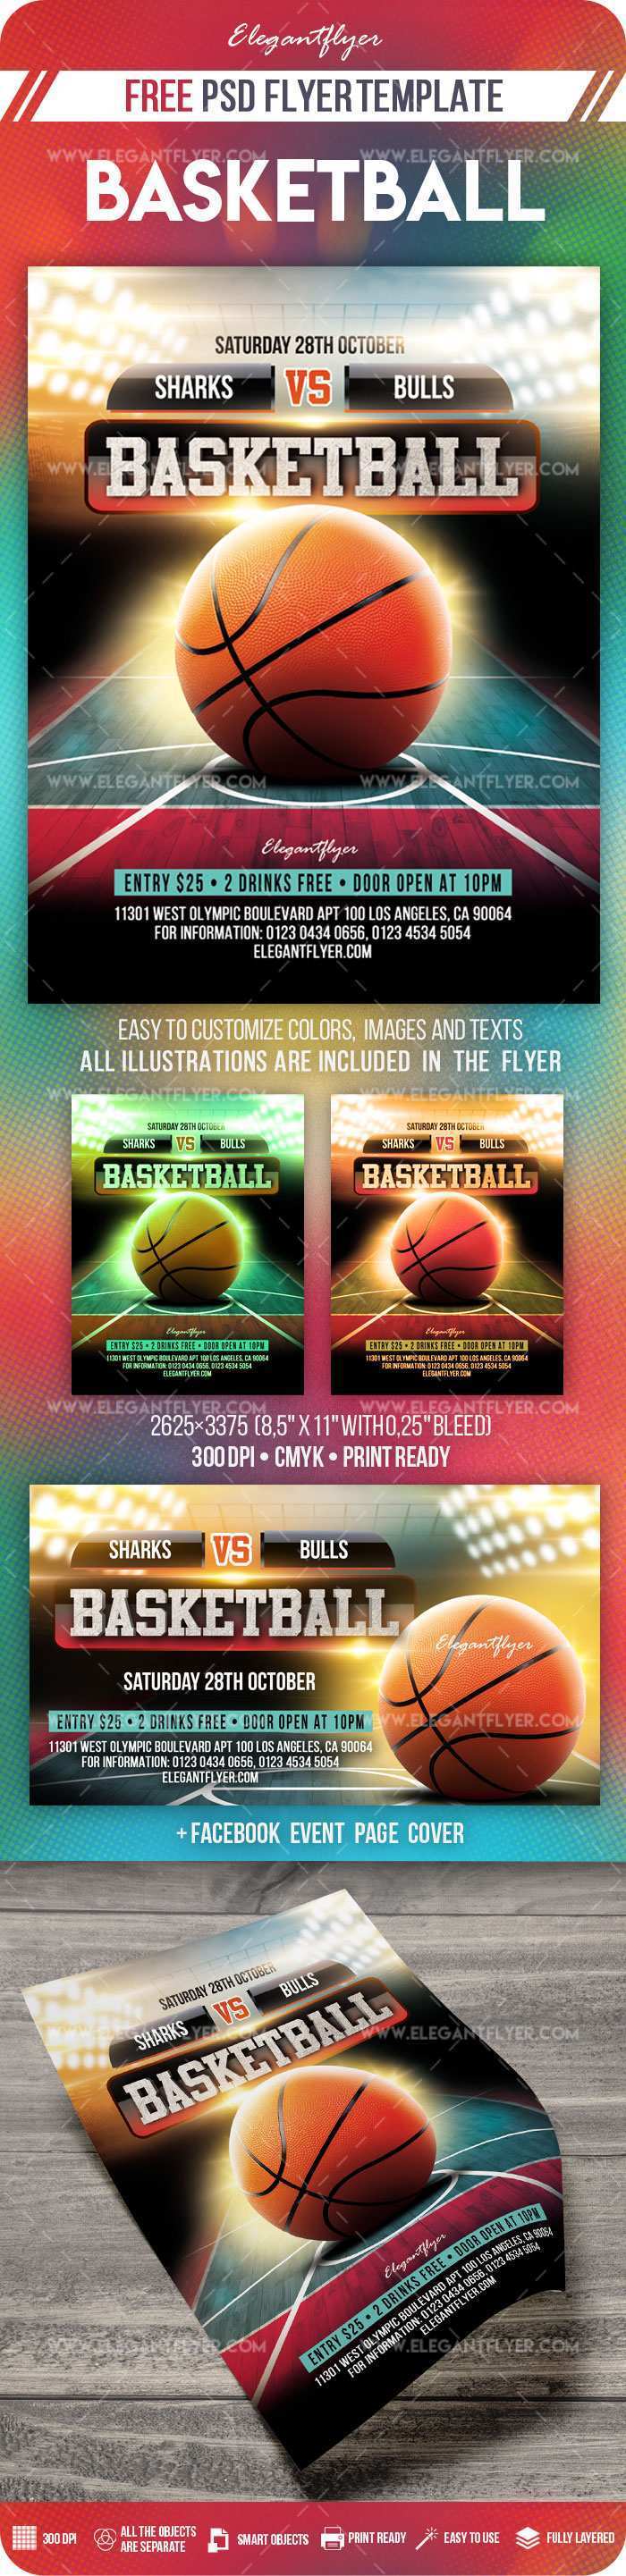 53 The Best Basketball Game Flyer Template PSD File with Basketball Game Flyer Template